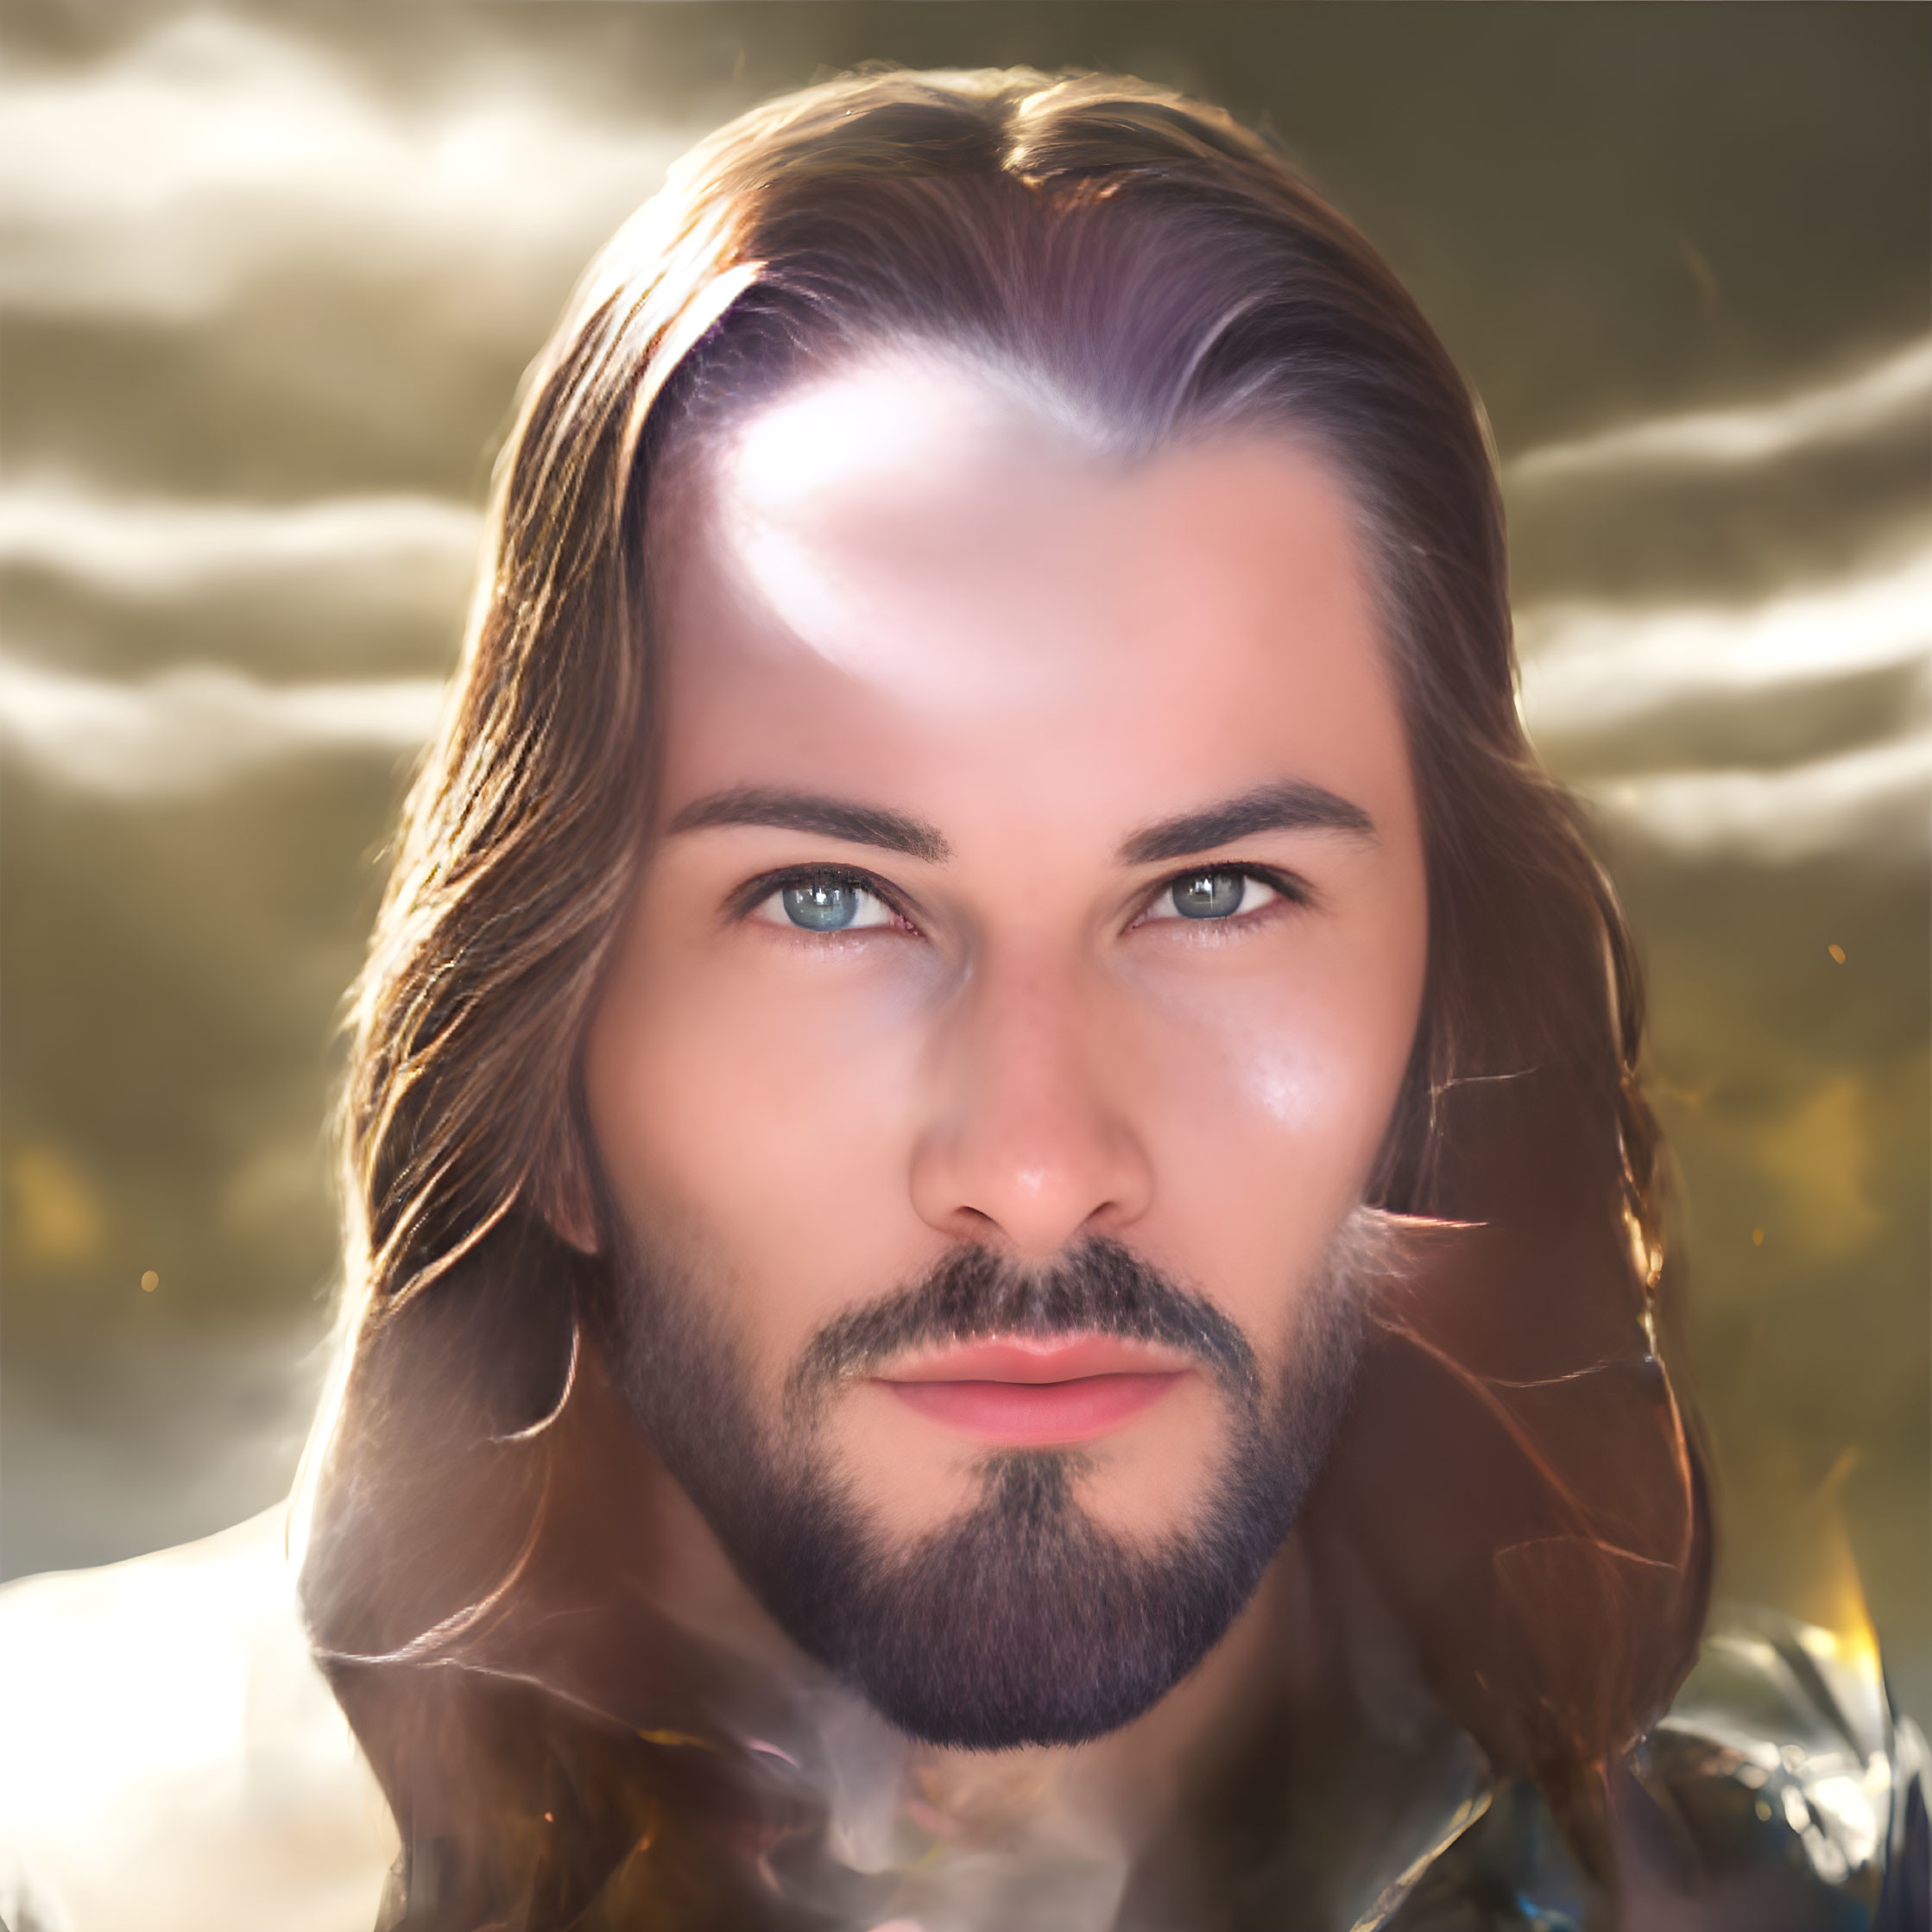 Man with Long Brown Hair and Blue Eyes in Digital Portrait